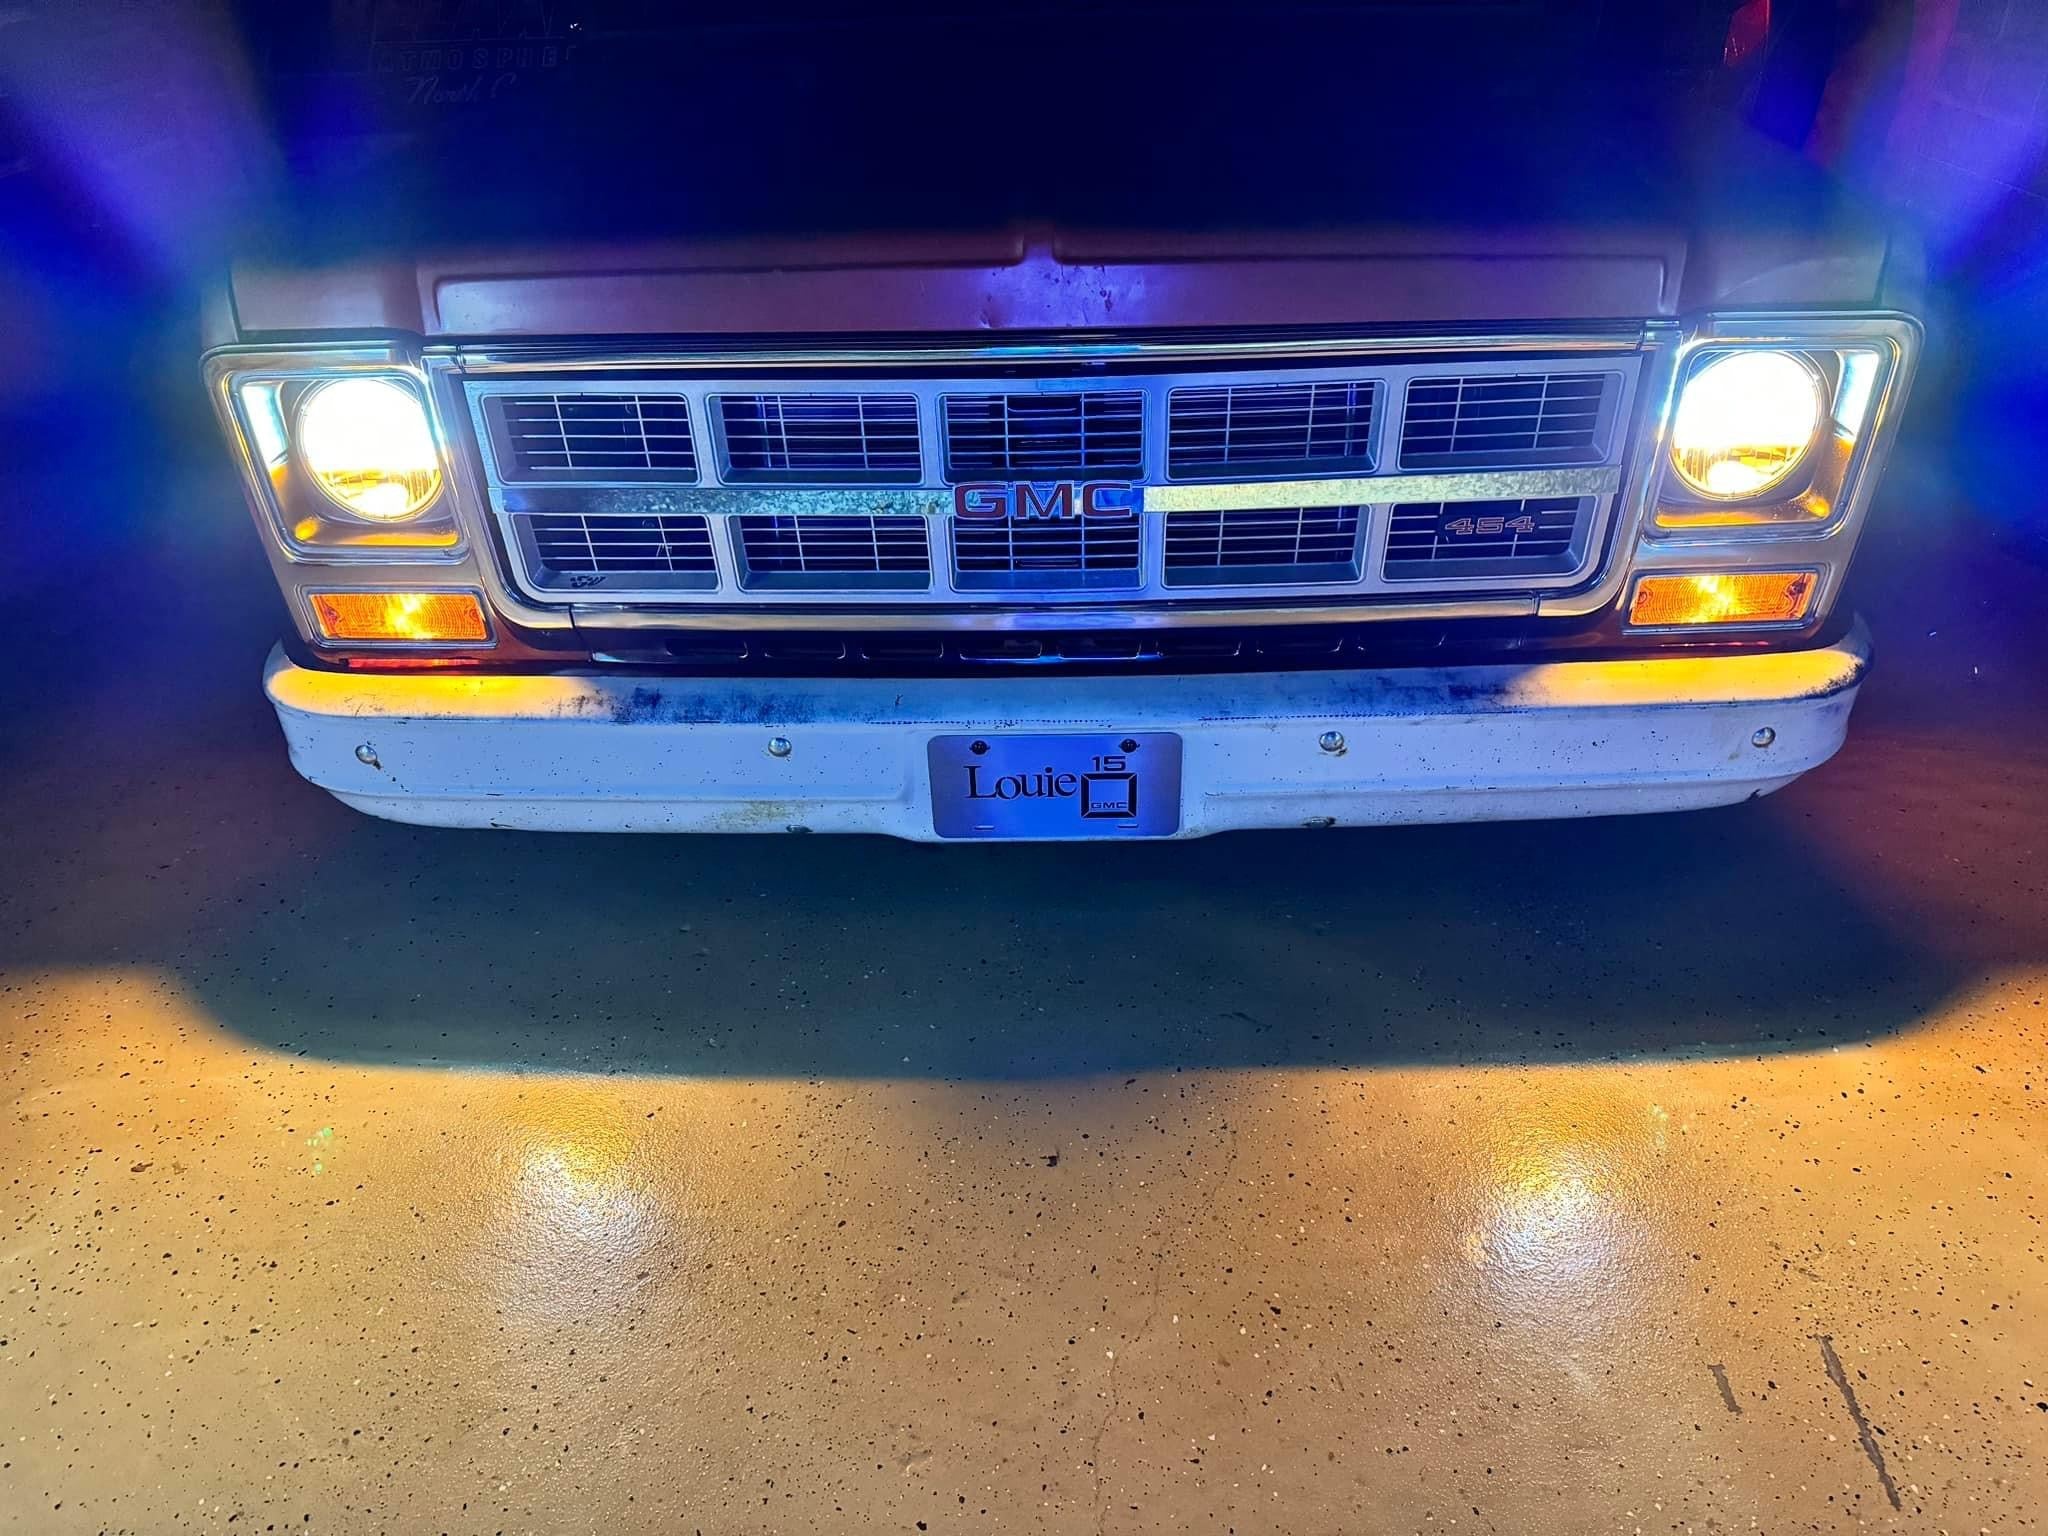 Grille AF (Aluminum Fabricated) 1977-80 GMC Truck | Engineered Vintage | Custom Grilles for Classic Trucks